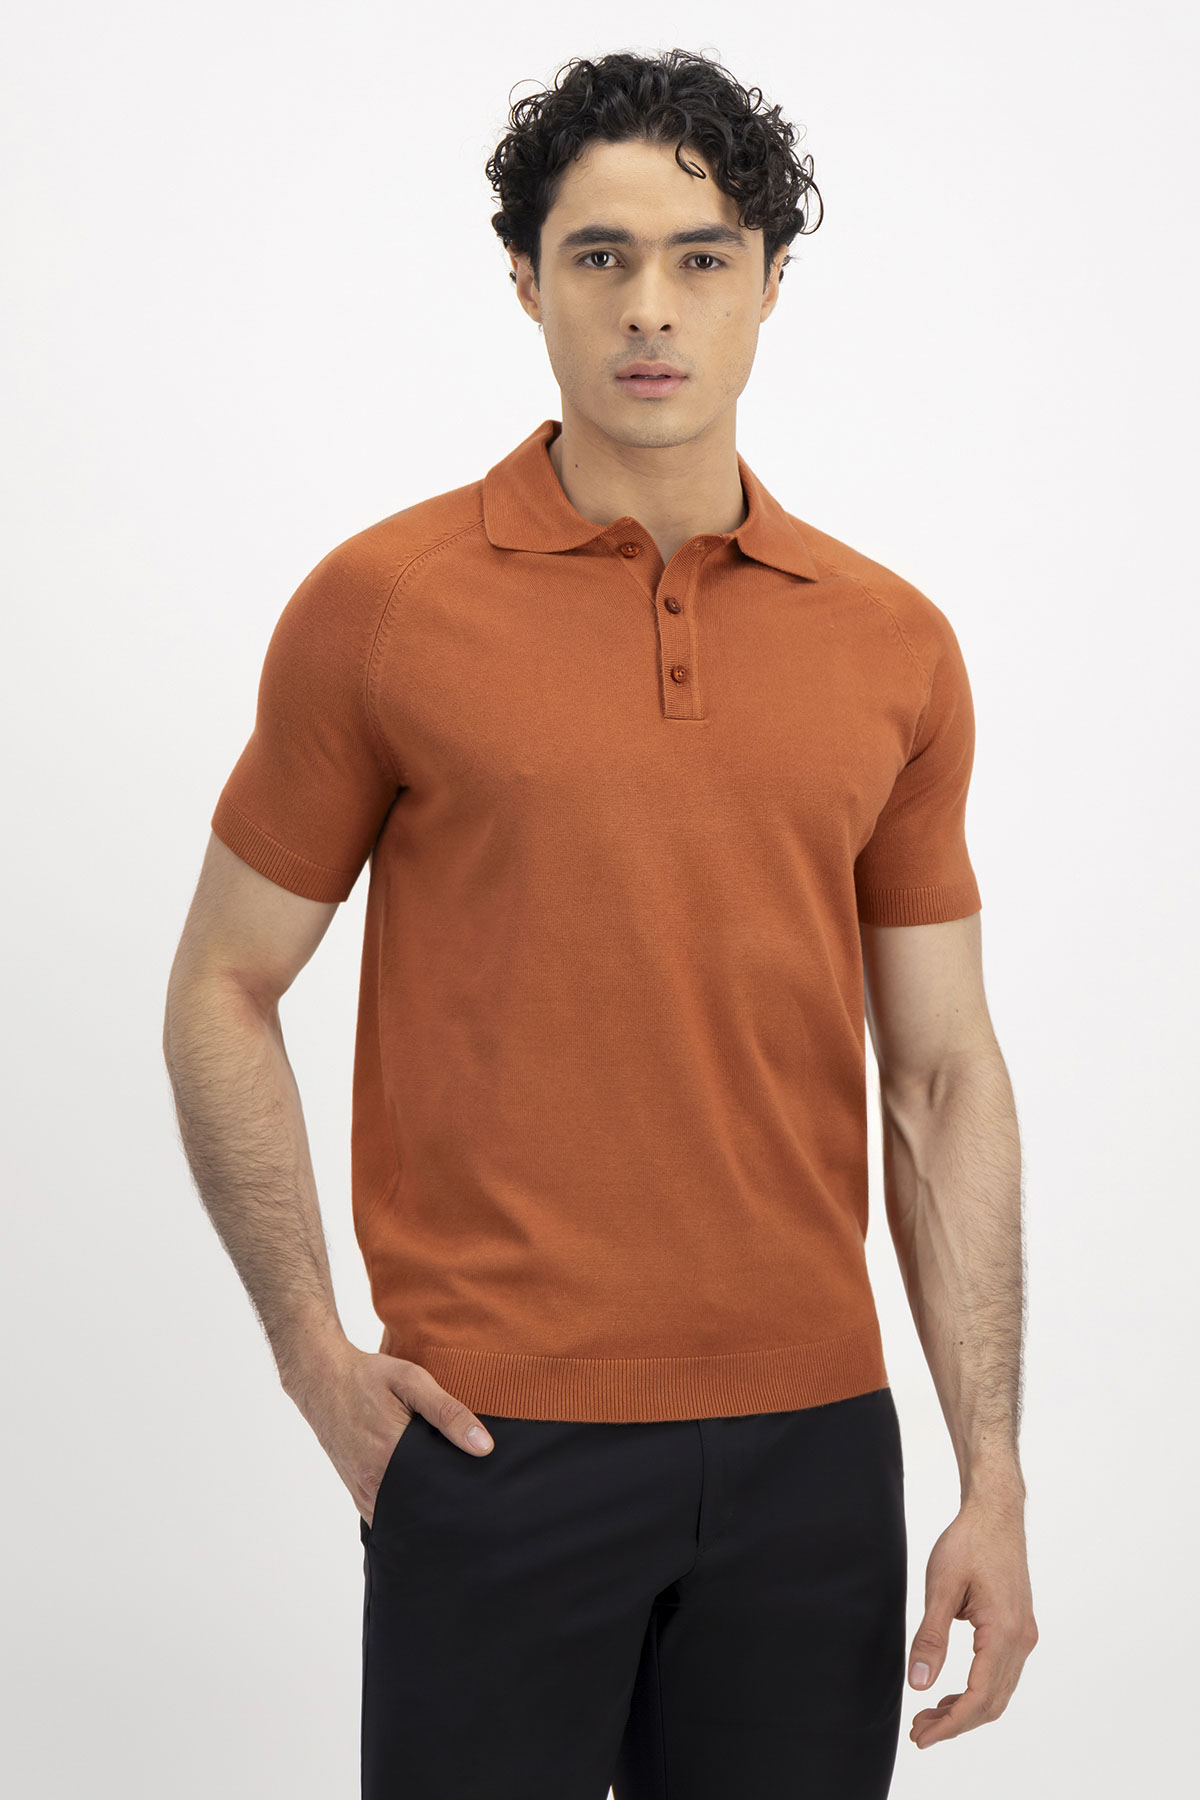 SUÉTER TIPO POLO SLIM FIT LMENTAL